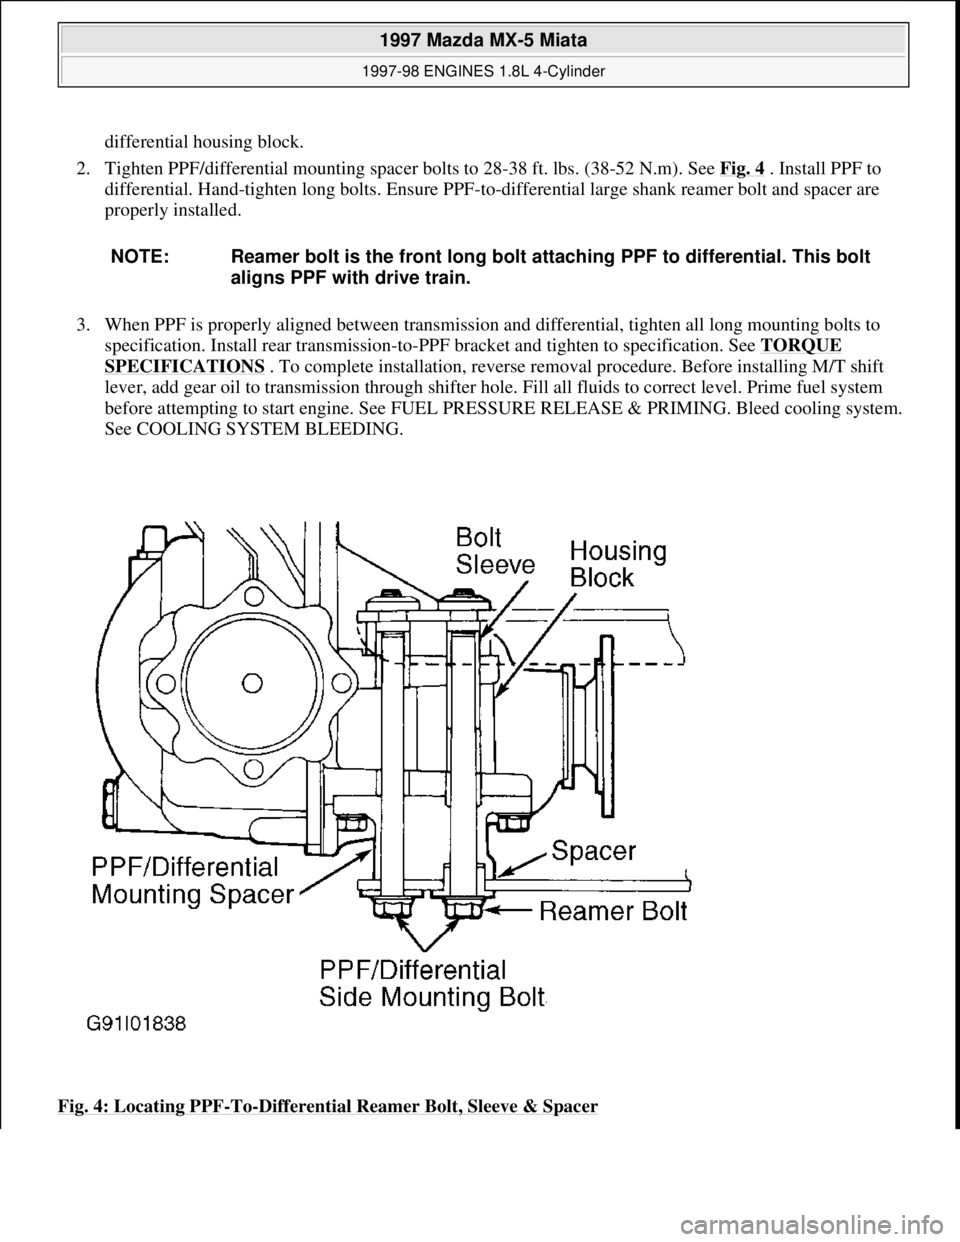 MAZDA MIATA 1997  Factory Repair Manual differential housing block.  
2. Tighten PPF/differential mounting spacer bolts to 28-38 ft. lbs. (38-52 N.m). See Fig. 4
 . Install PPF to 
differential. Hand-tighten long bolts. Ensure PPF-to-differ